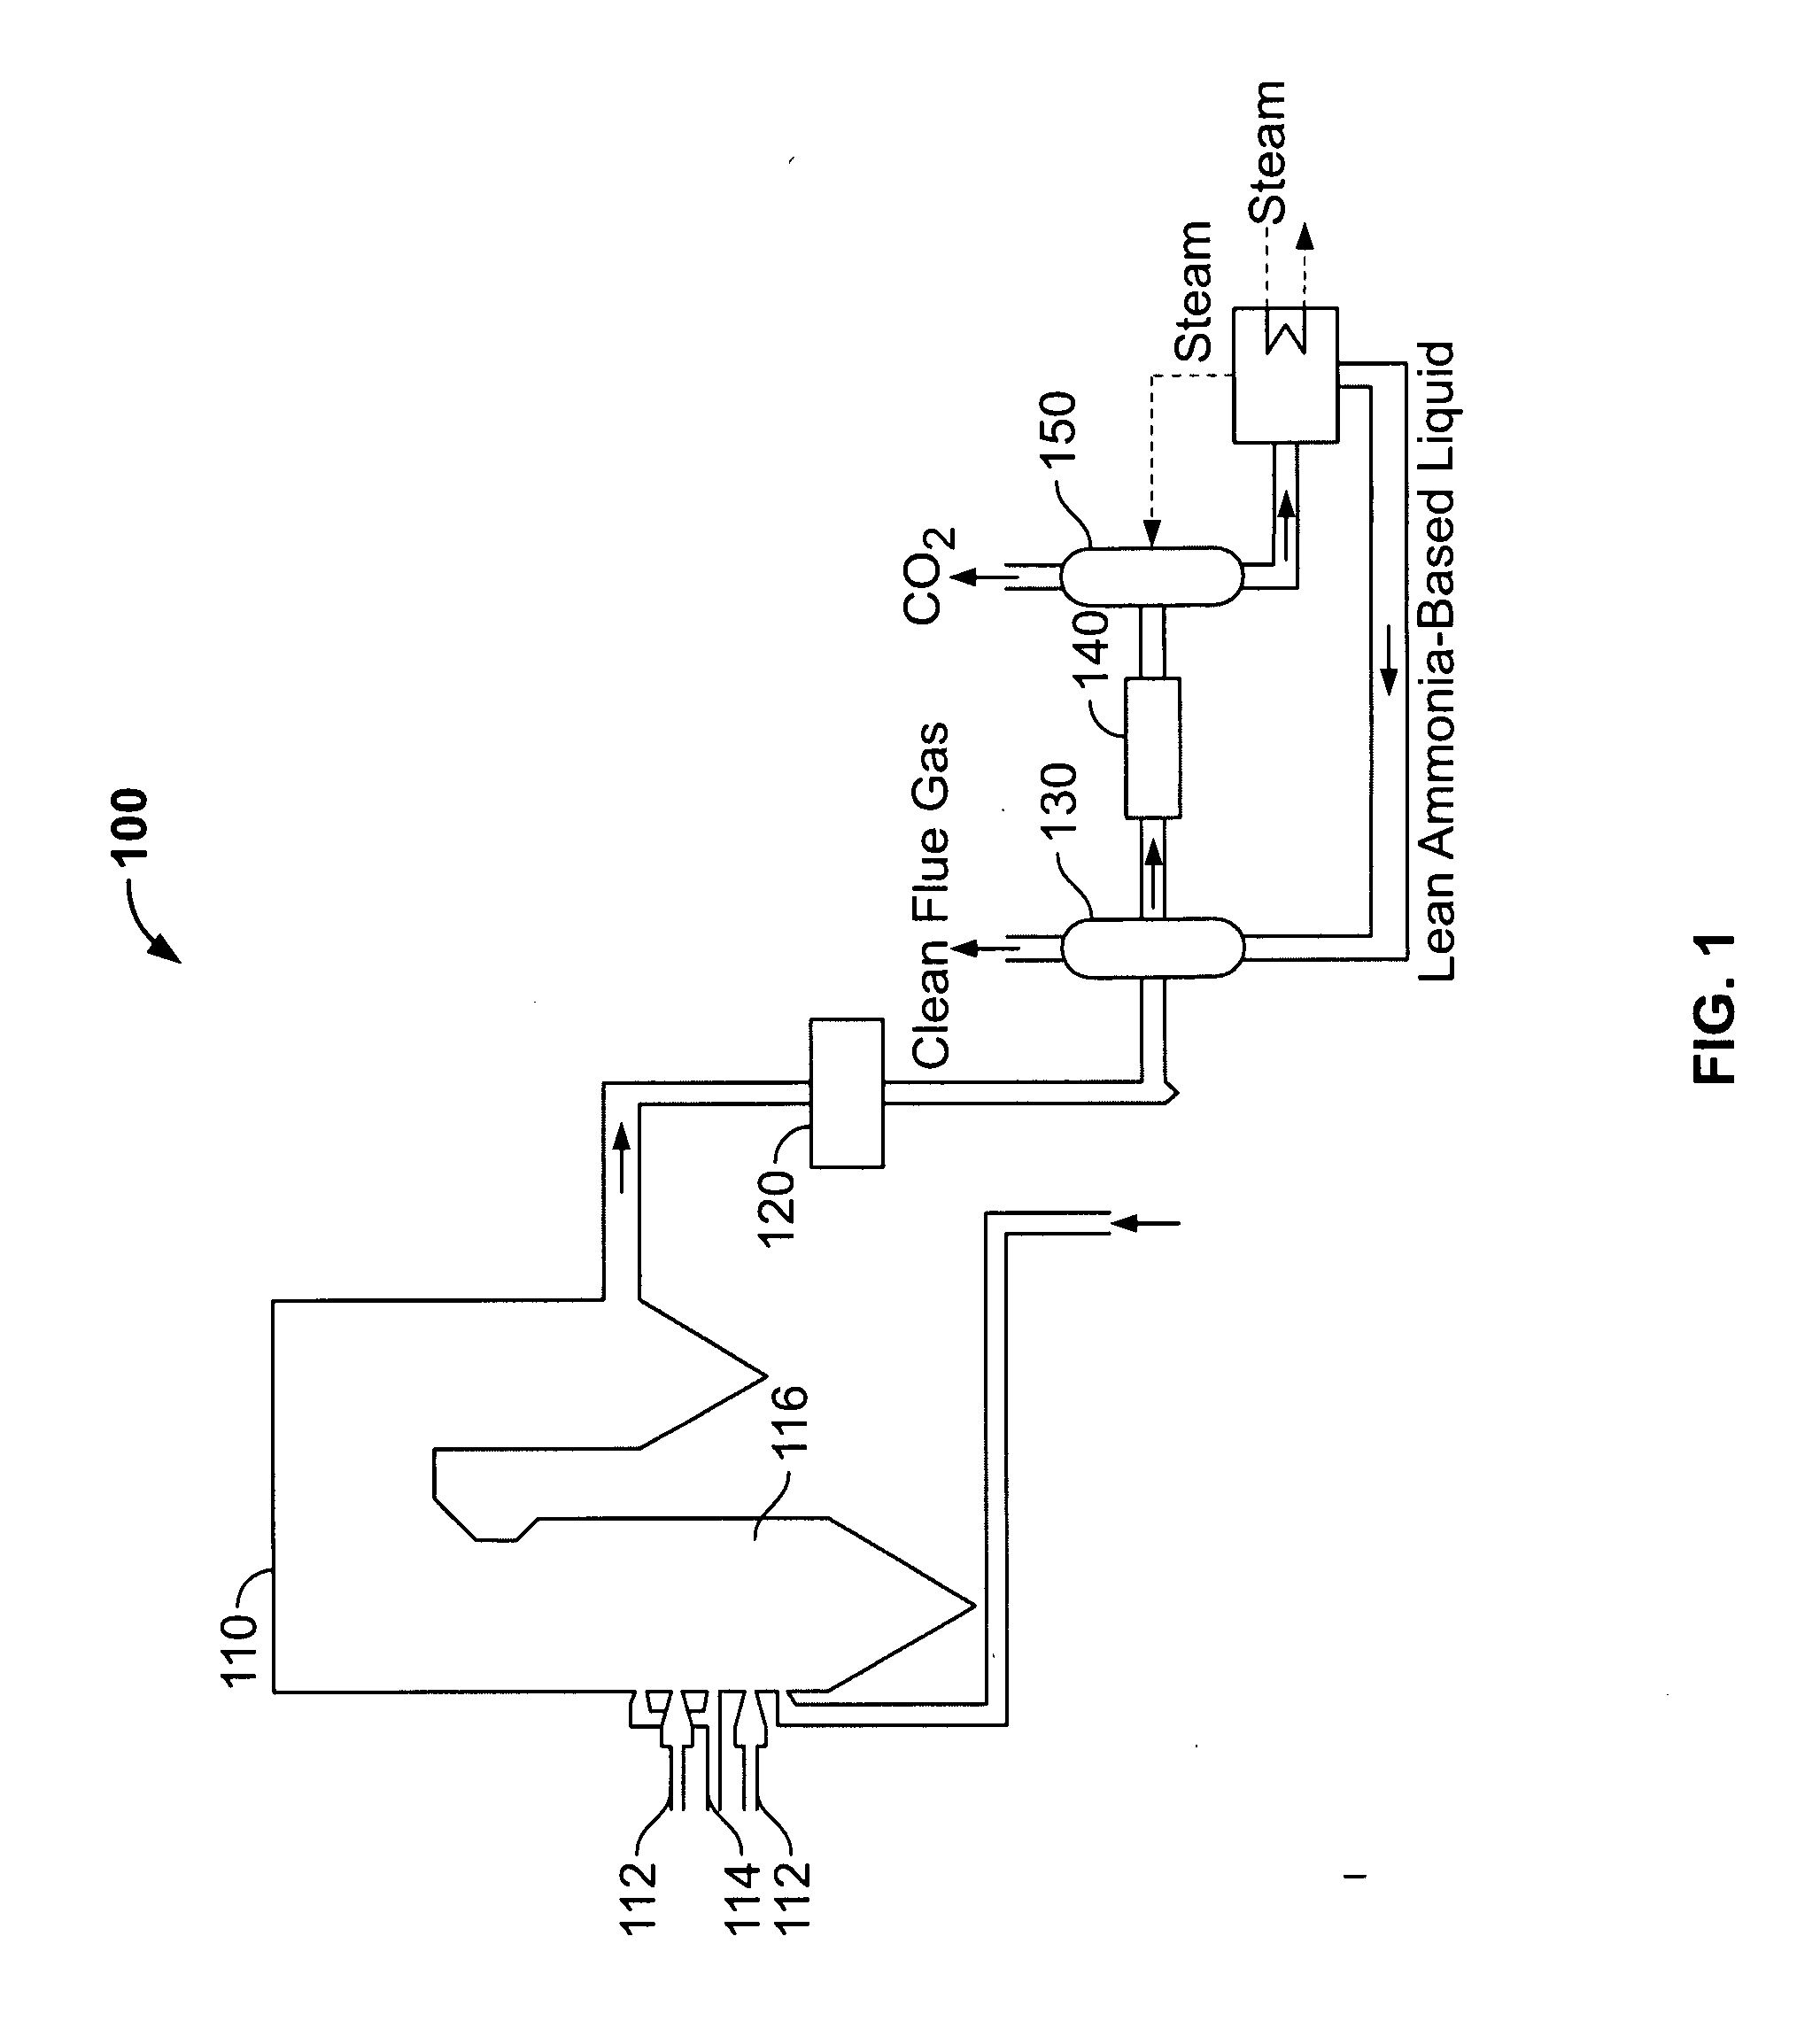 Methods and systems for reducing carbon dioxide in combustion flue gases